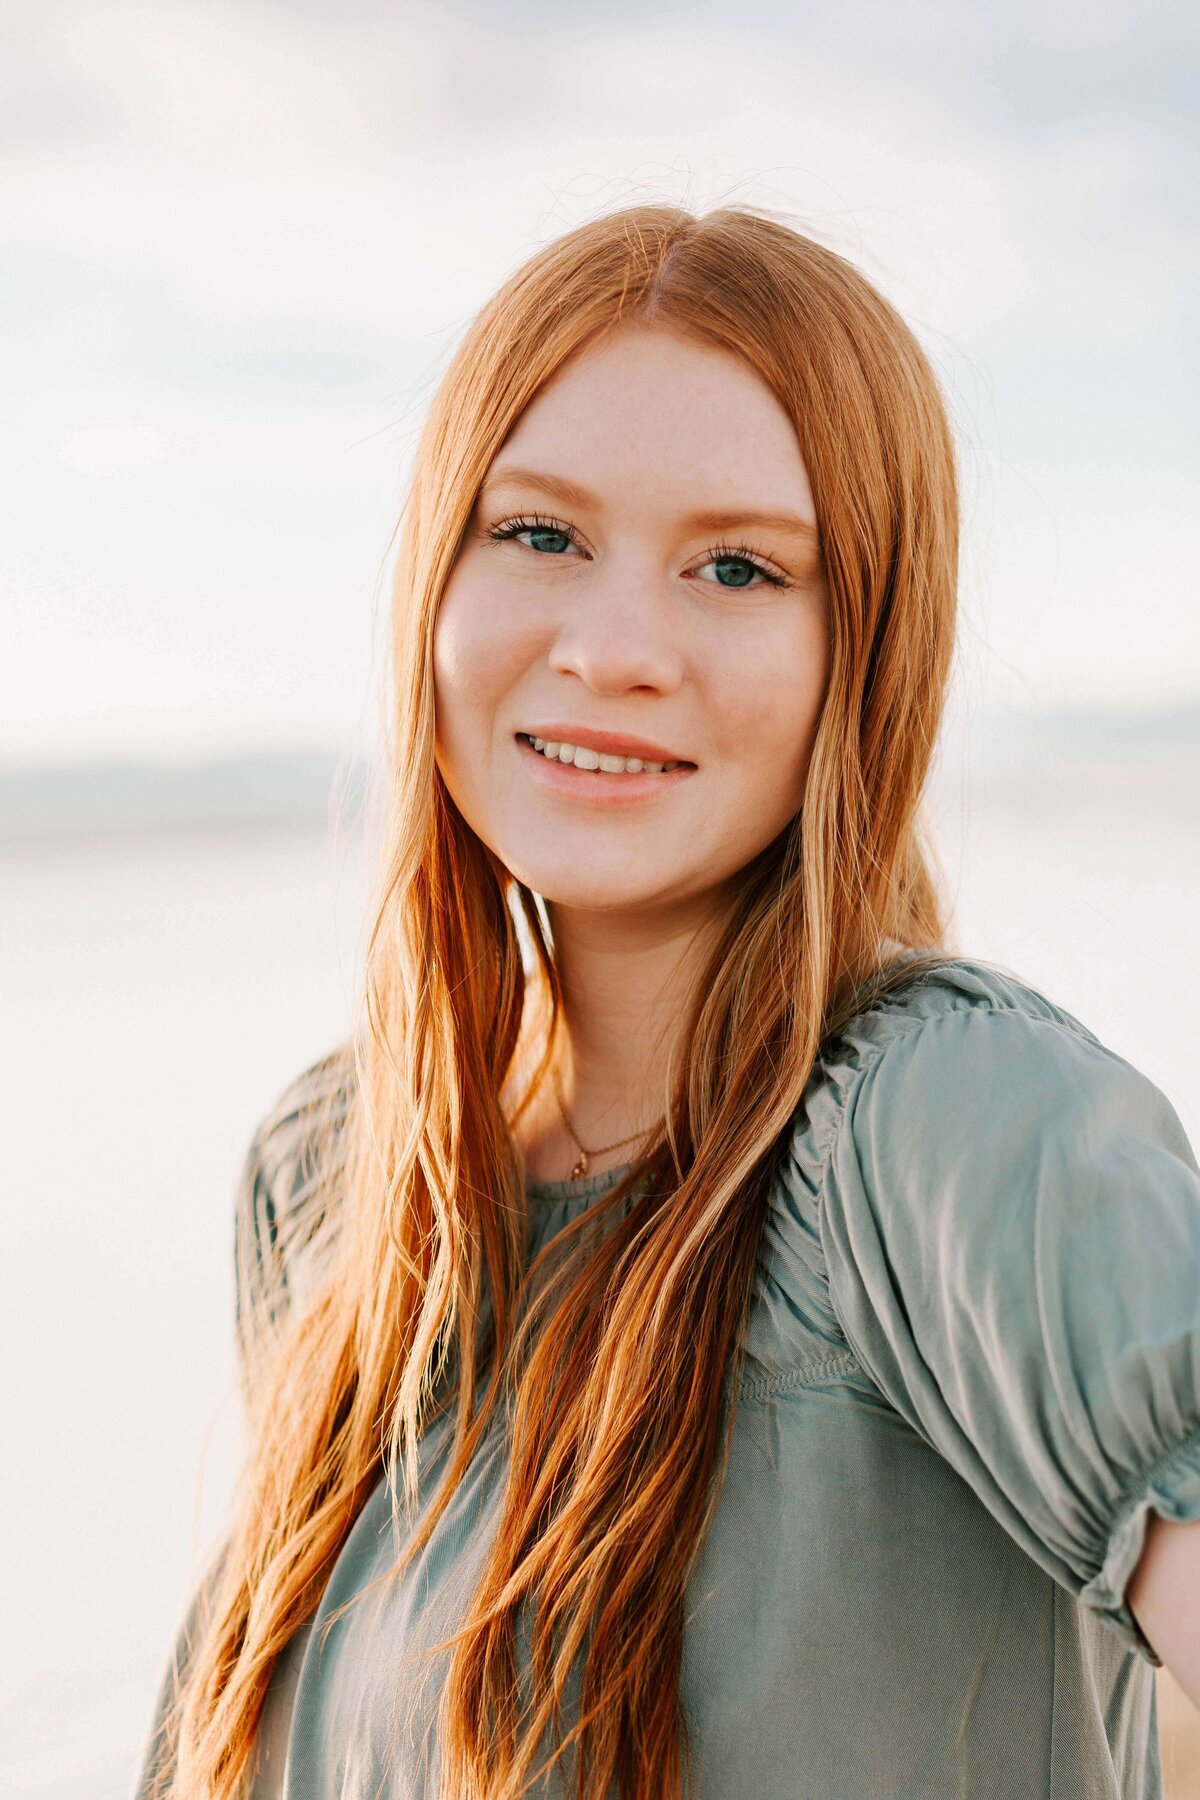 A teenage girl with red hair in a green blouse stands smiling